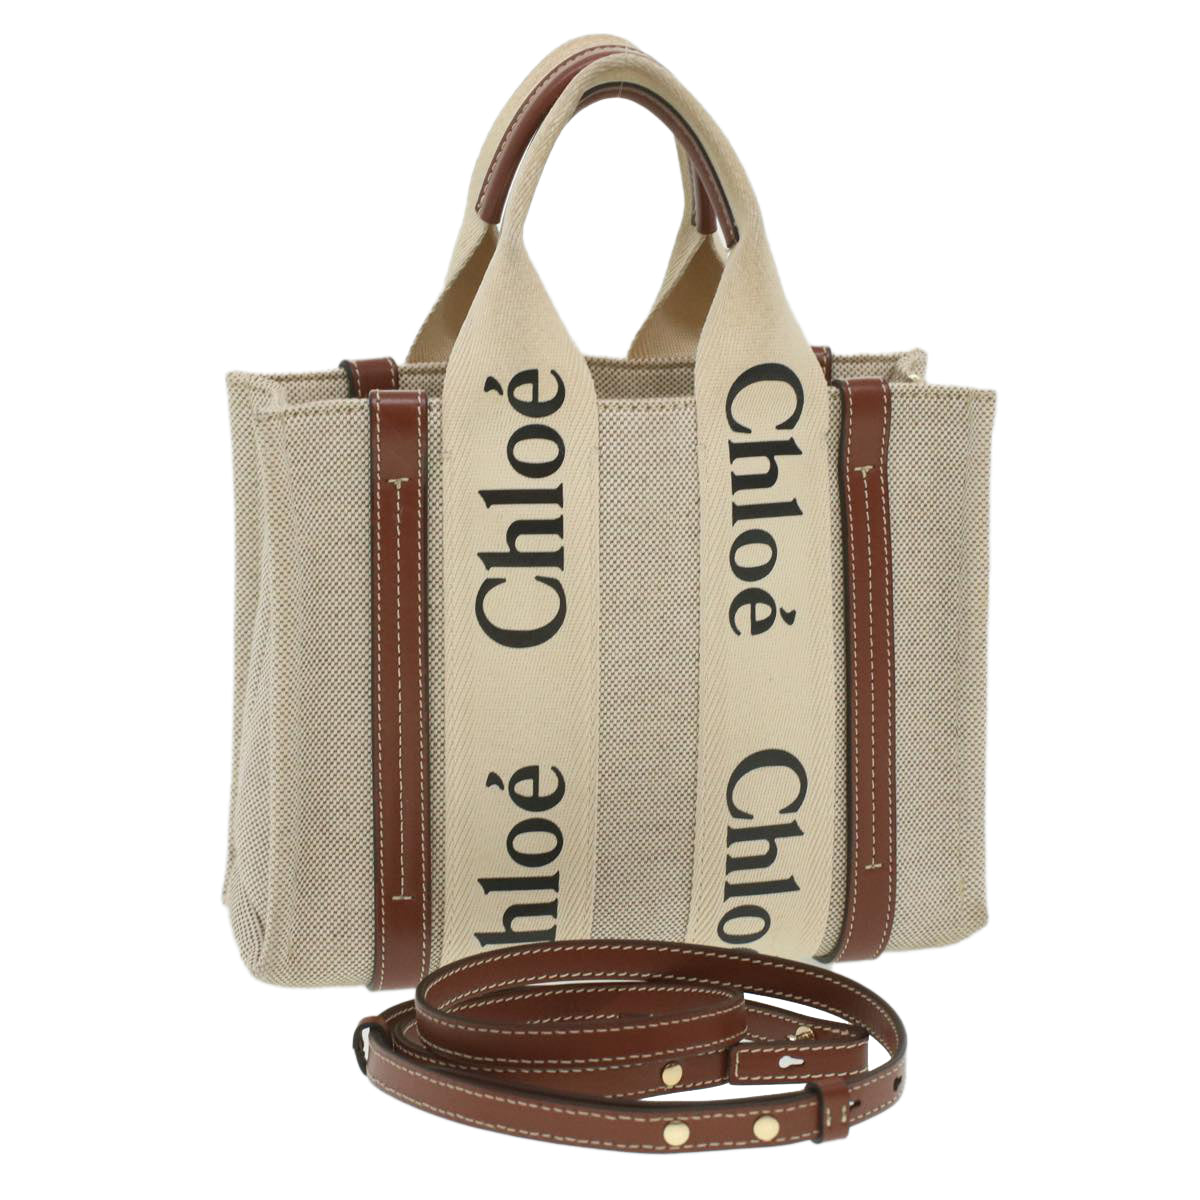 Chloe Woody Hand Bag Canvas 2way Gray Brown Auth 37269A